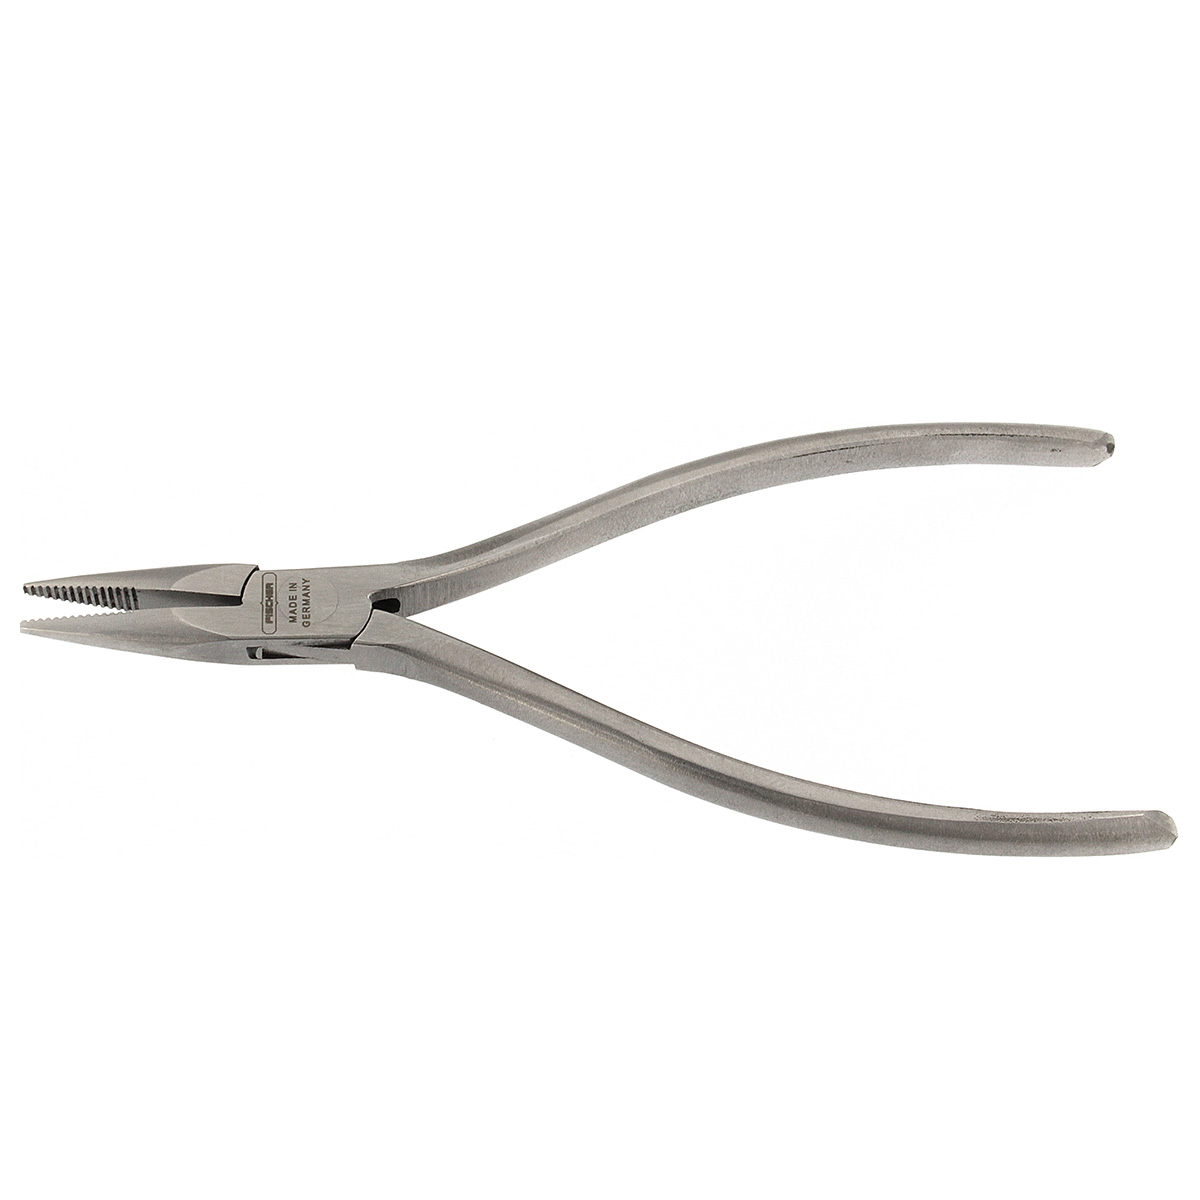 Chain nose pliers with cut, length 120 mm